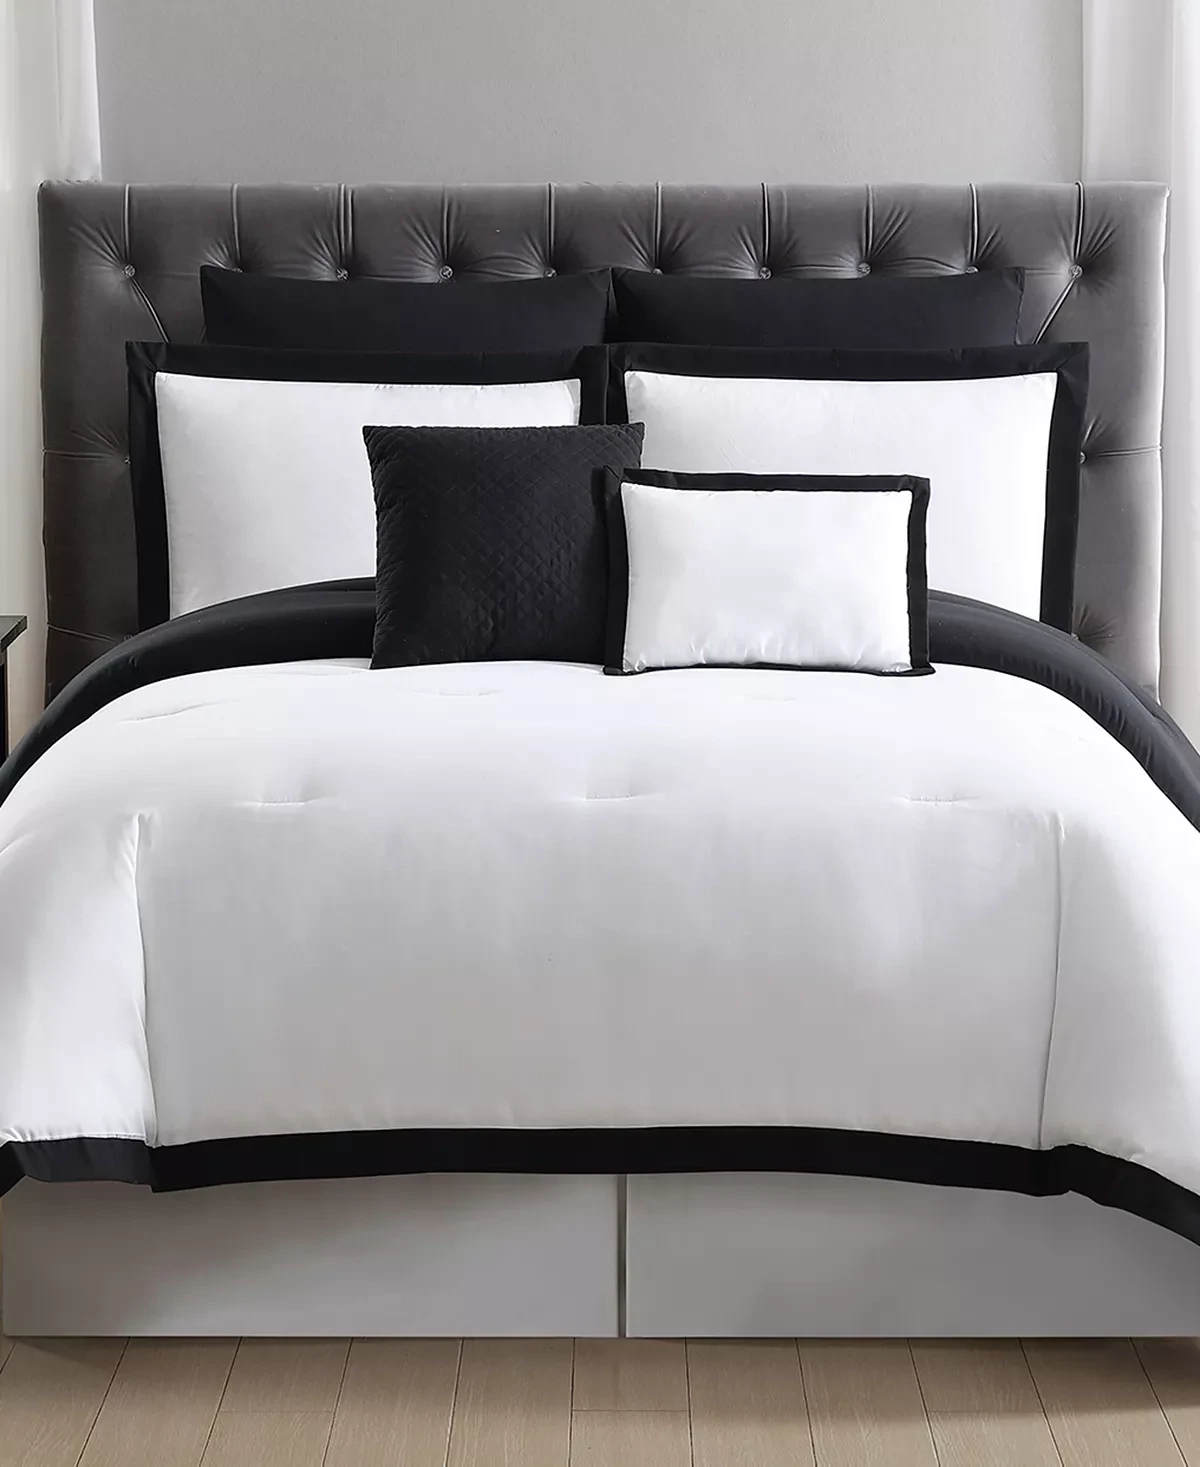 Truly Soft Everyday 7-Piece White and Black King Duvet Cover Set